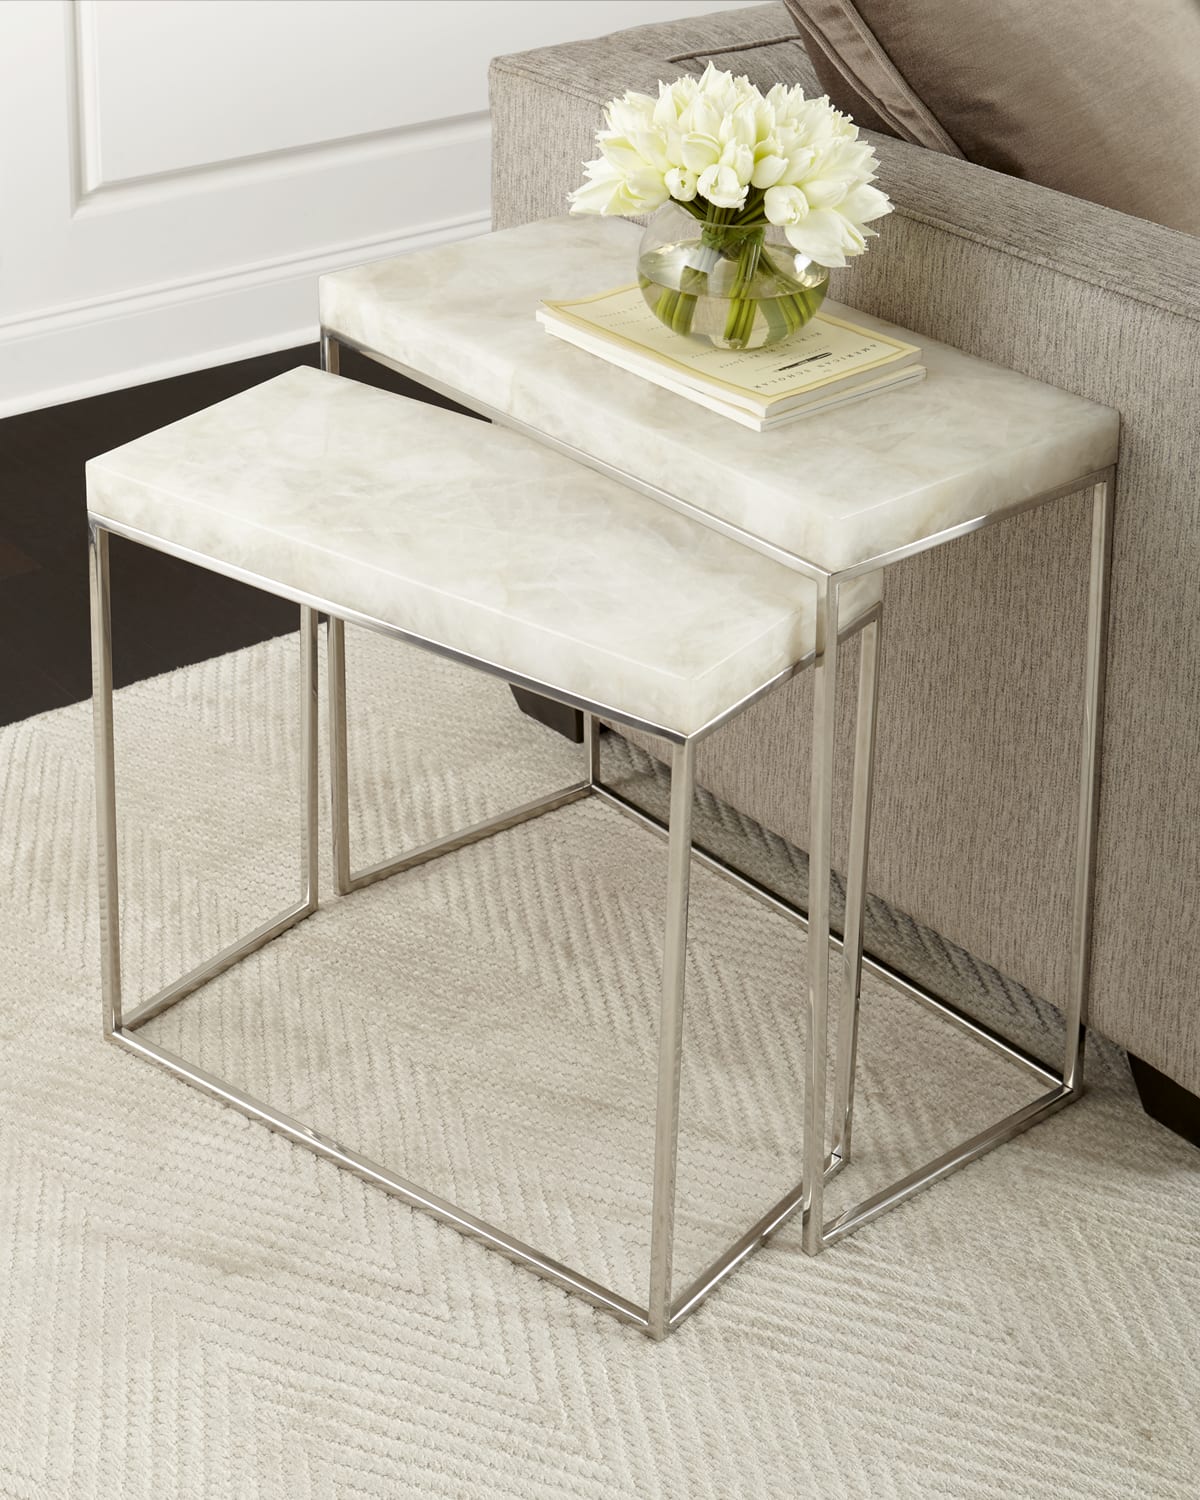 HORCHOW Contemporary SIDE TABLE Mirrored Faceted Bunching Cube Modern Accent 